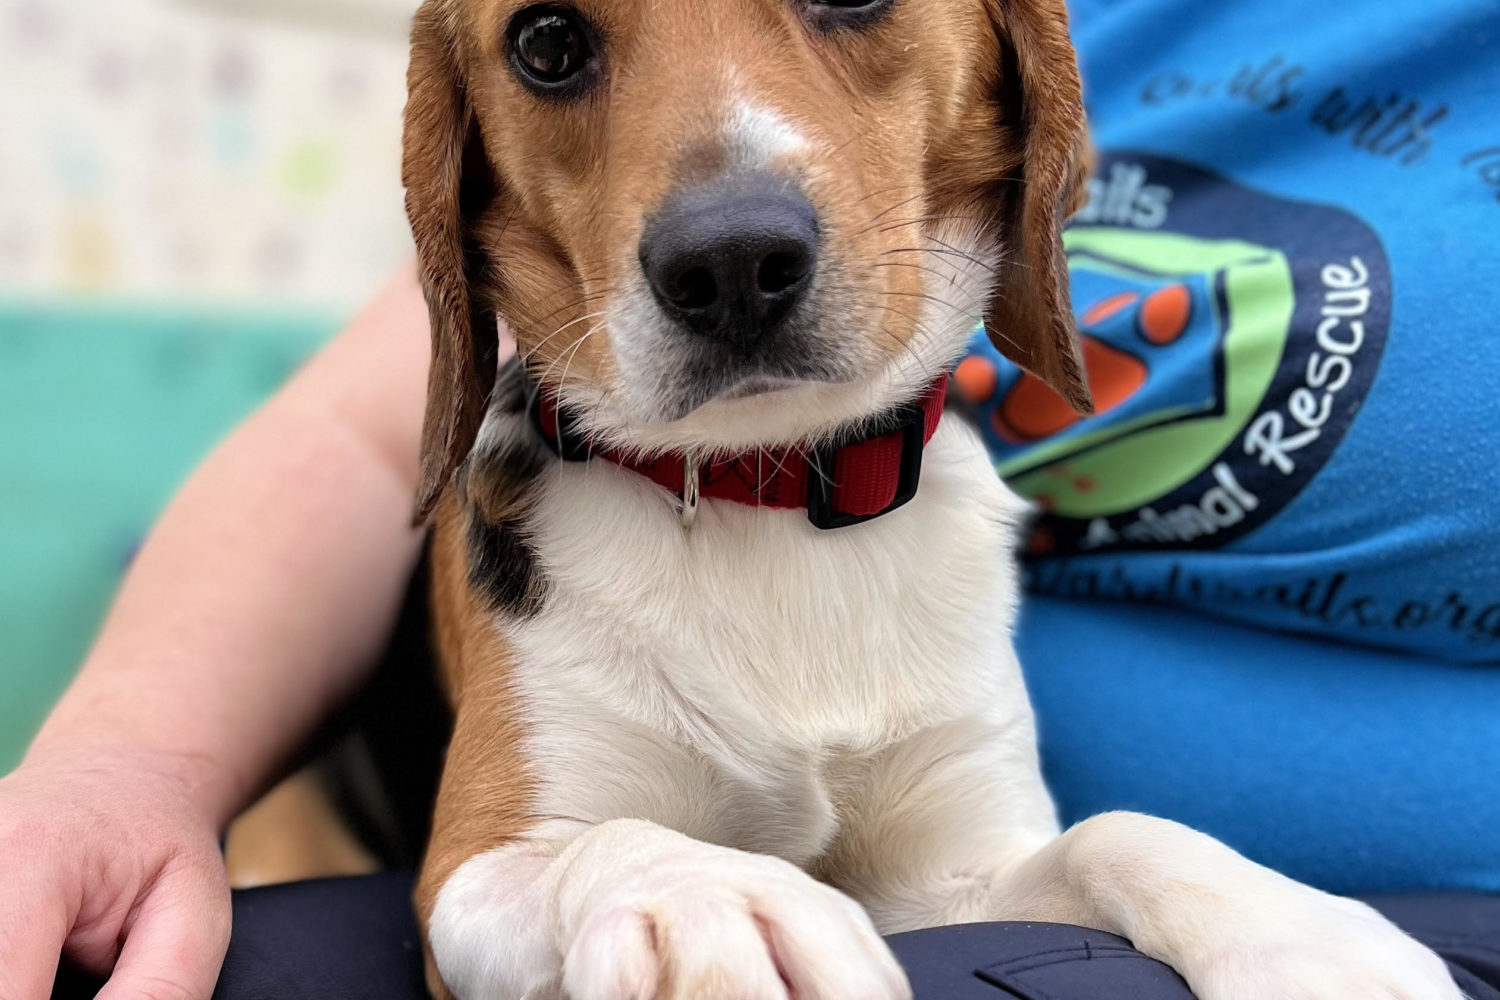 One of the beagles rescued from the Envigo research and breeding facility in Cumberland, Virginia. Photo courtesy of Homeward Trails/Sue Bell.